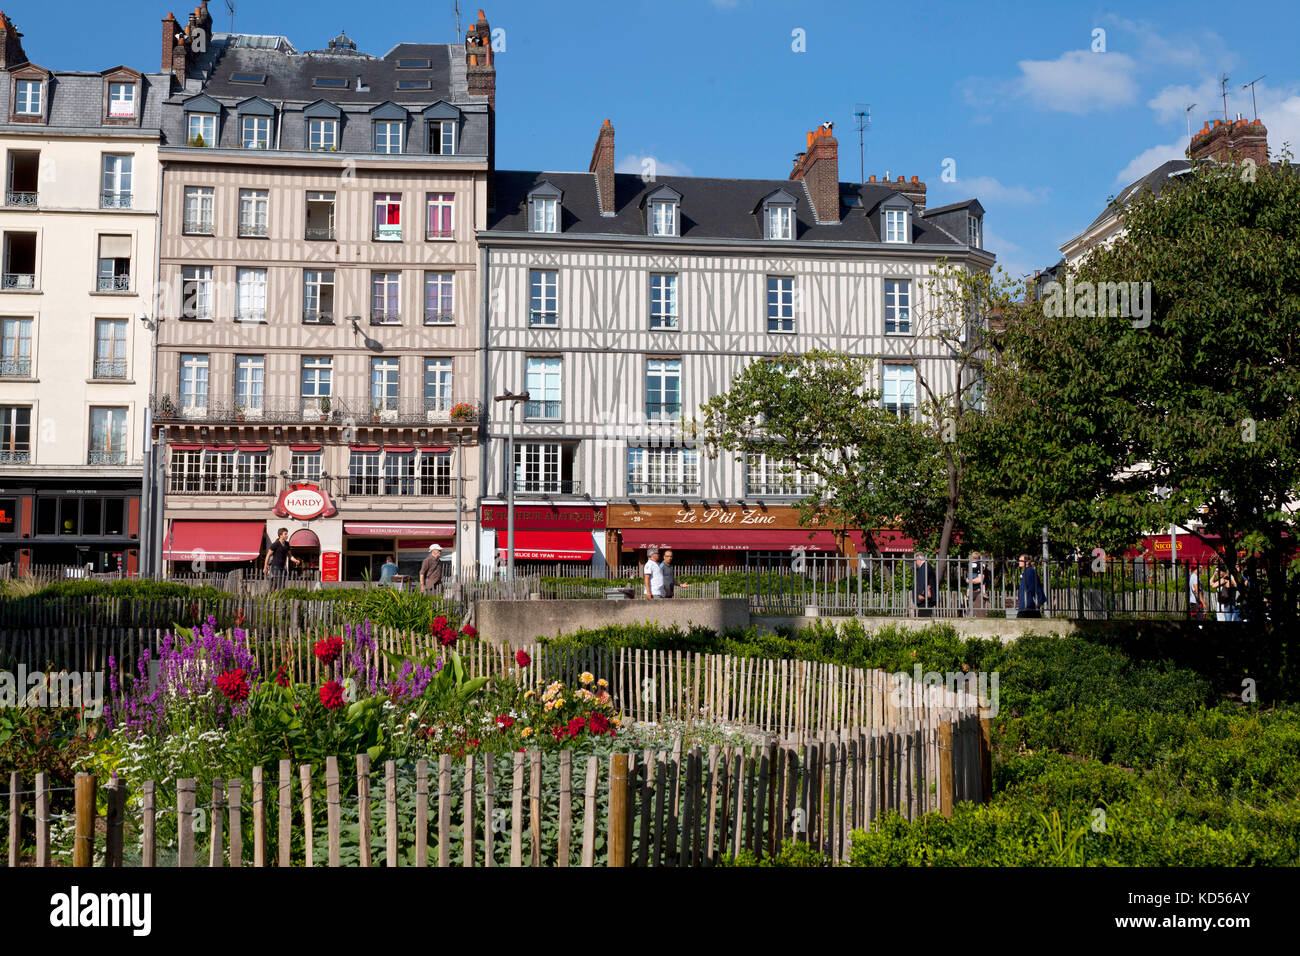 Rouen (northern France): facade of half-timbered houses in the square 'place du vieux marche' in the Old Town (not available for postcard production) Stock Photo